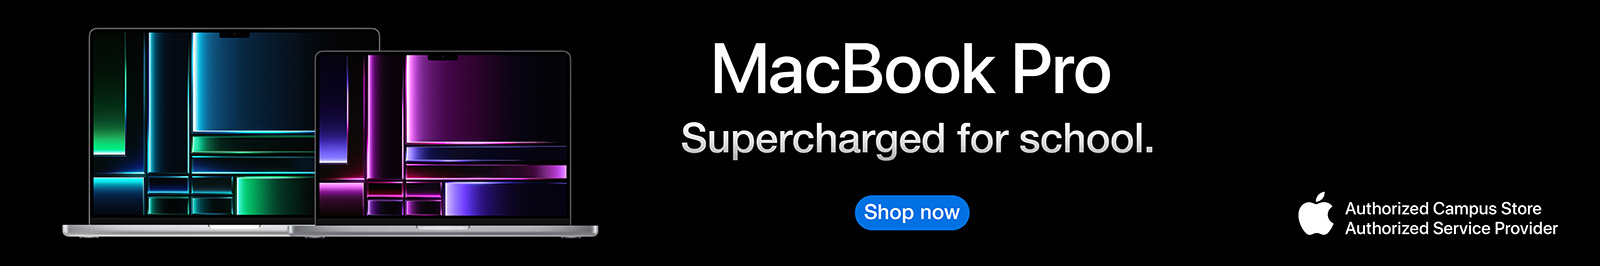 Shop Now.  MacBook Pro. Supercharged for school.  Authorized Campus Store.  Authorized Service Proivder.